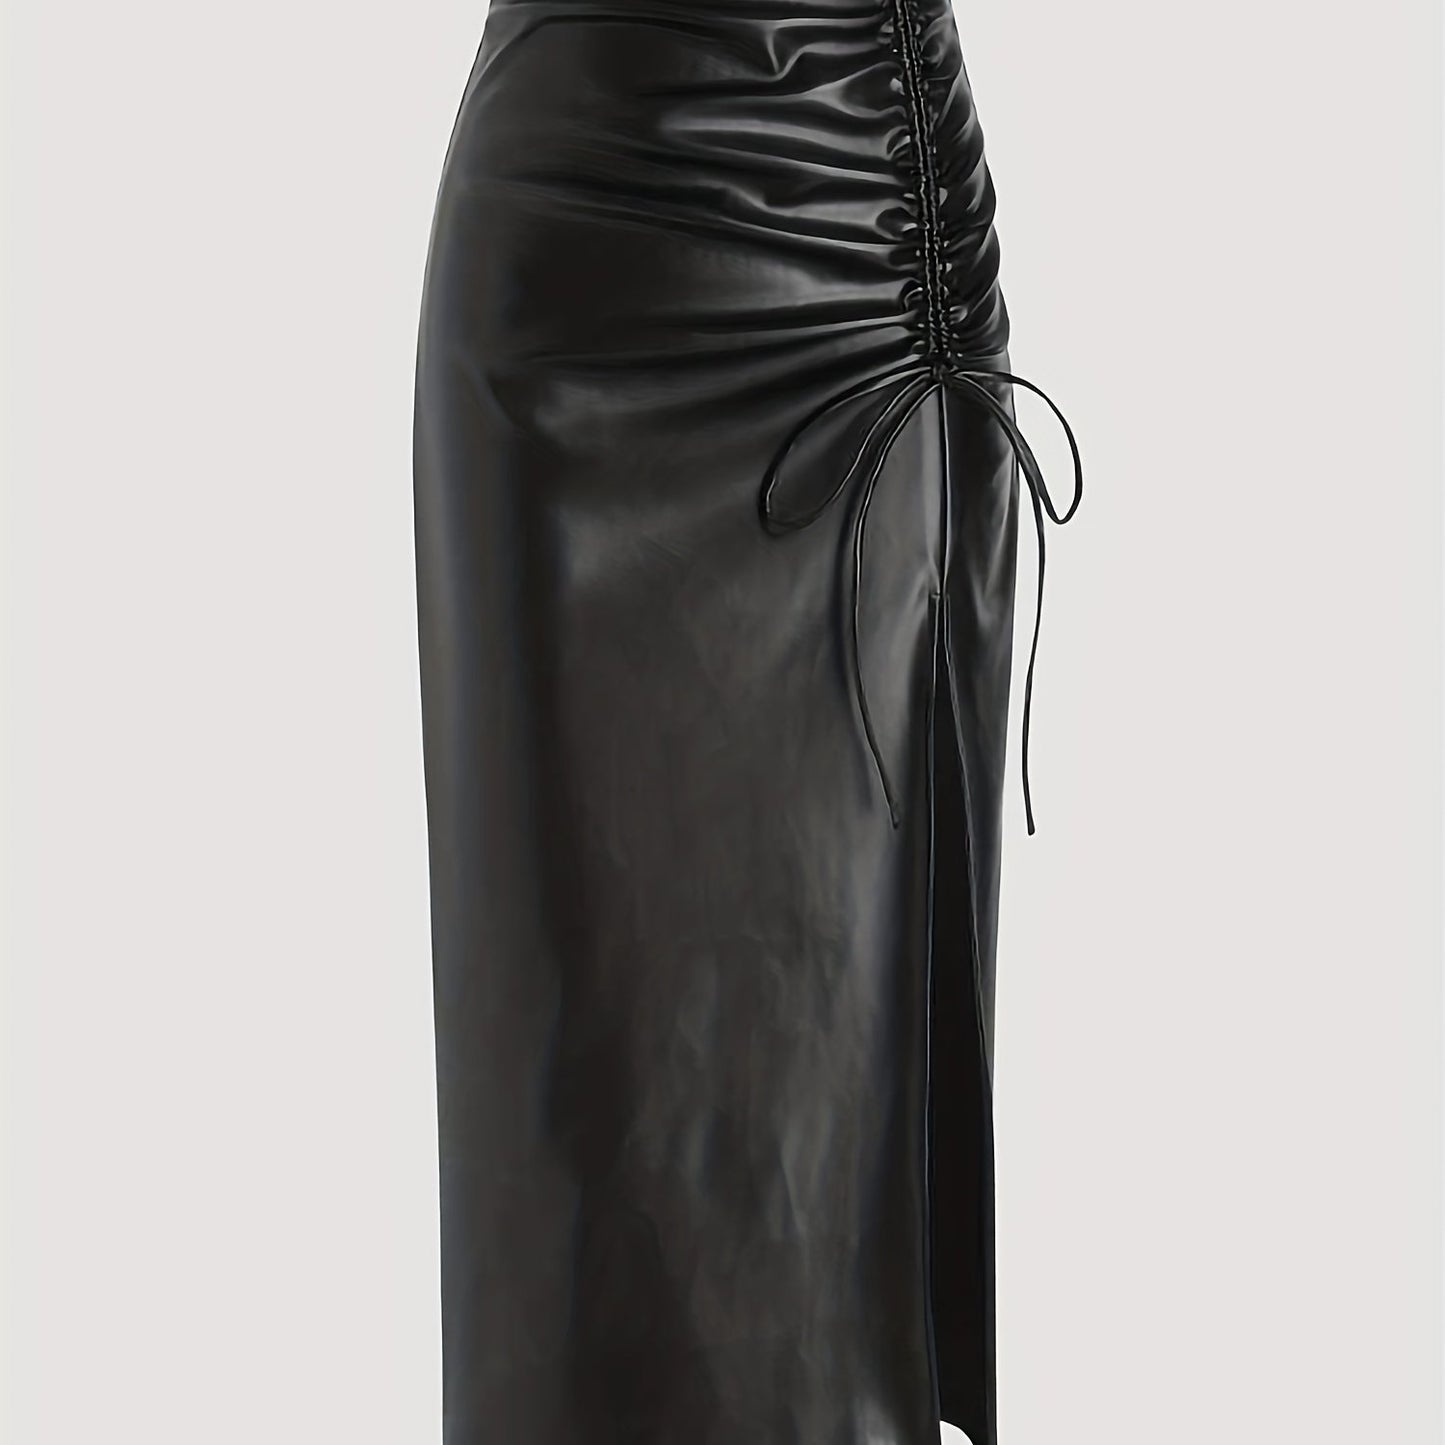 Antmvs Faux Leather Drawstring Split Skirt, Casual High Waist Bodycon Solid Skirt, Women's Clothing